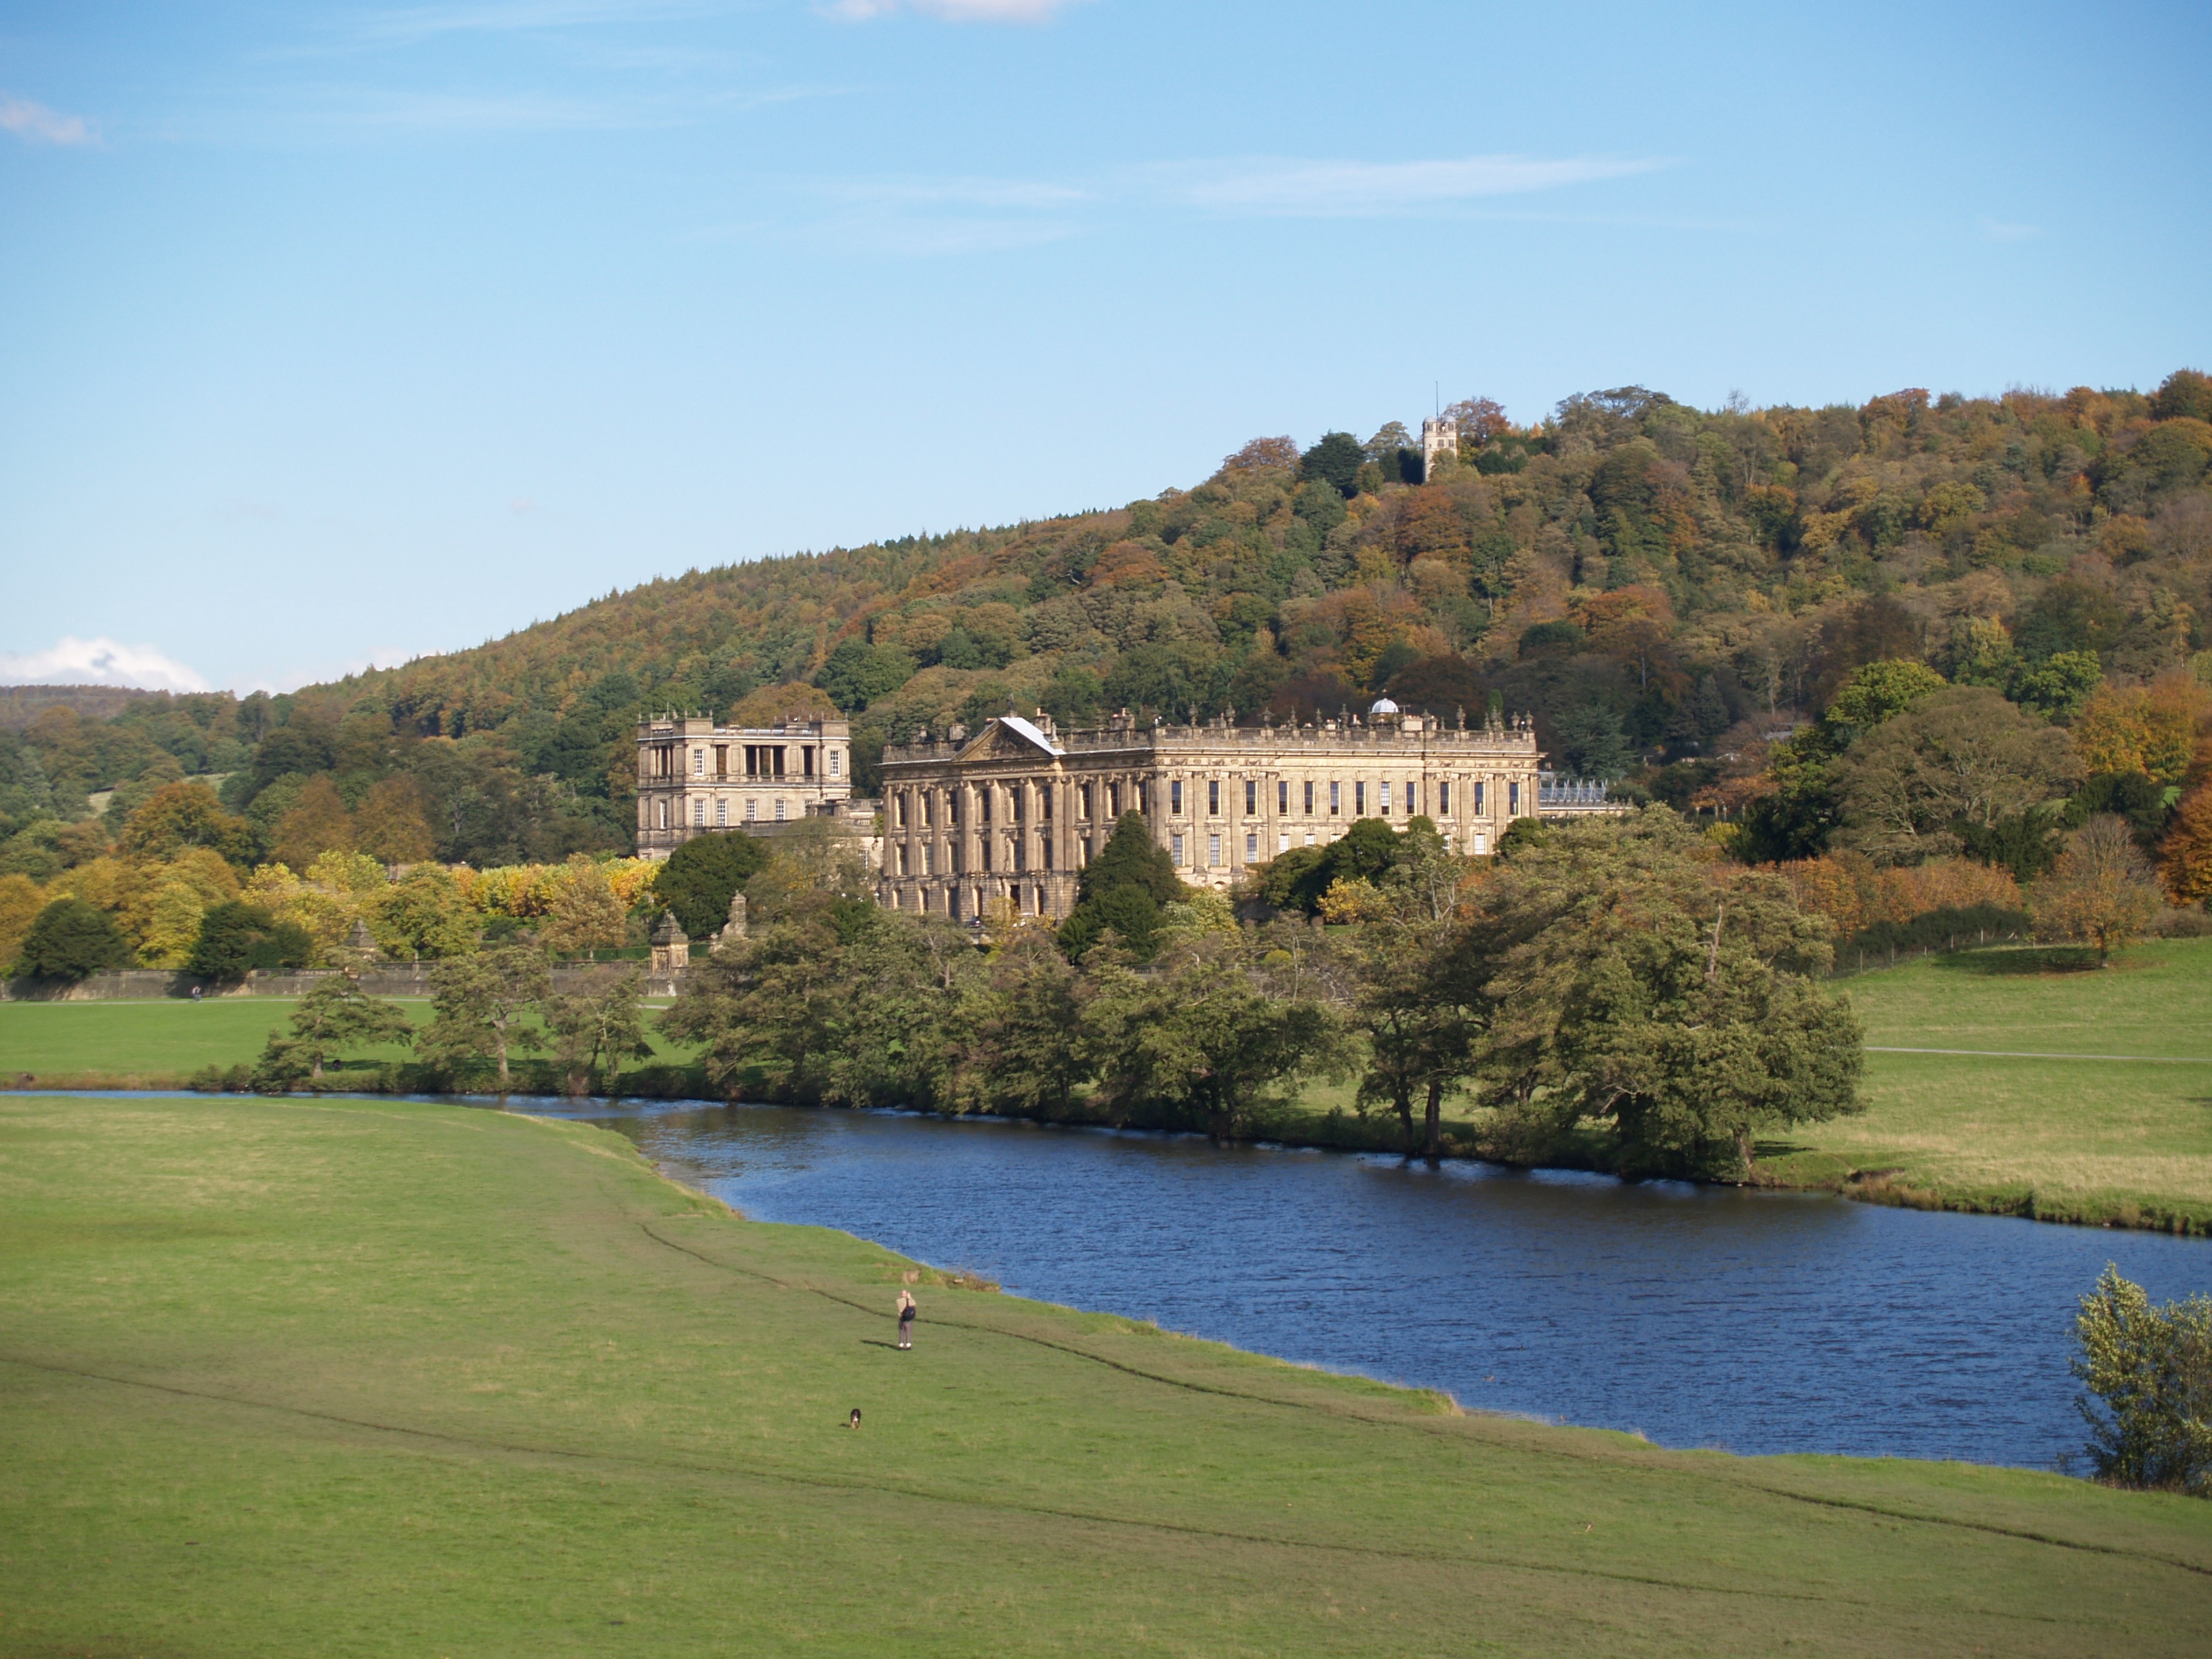 http://de.academic.ru/pictures/dewiki/67/Chatsworth_showing_hunting_tower.jpg